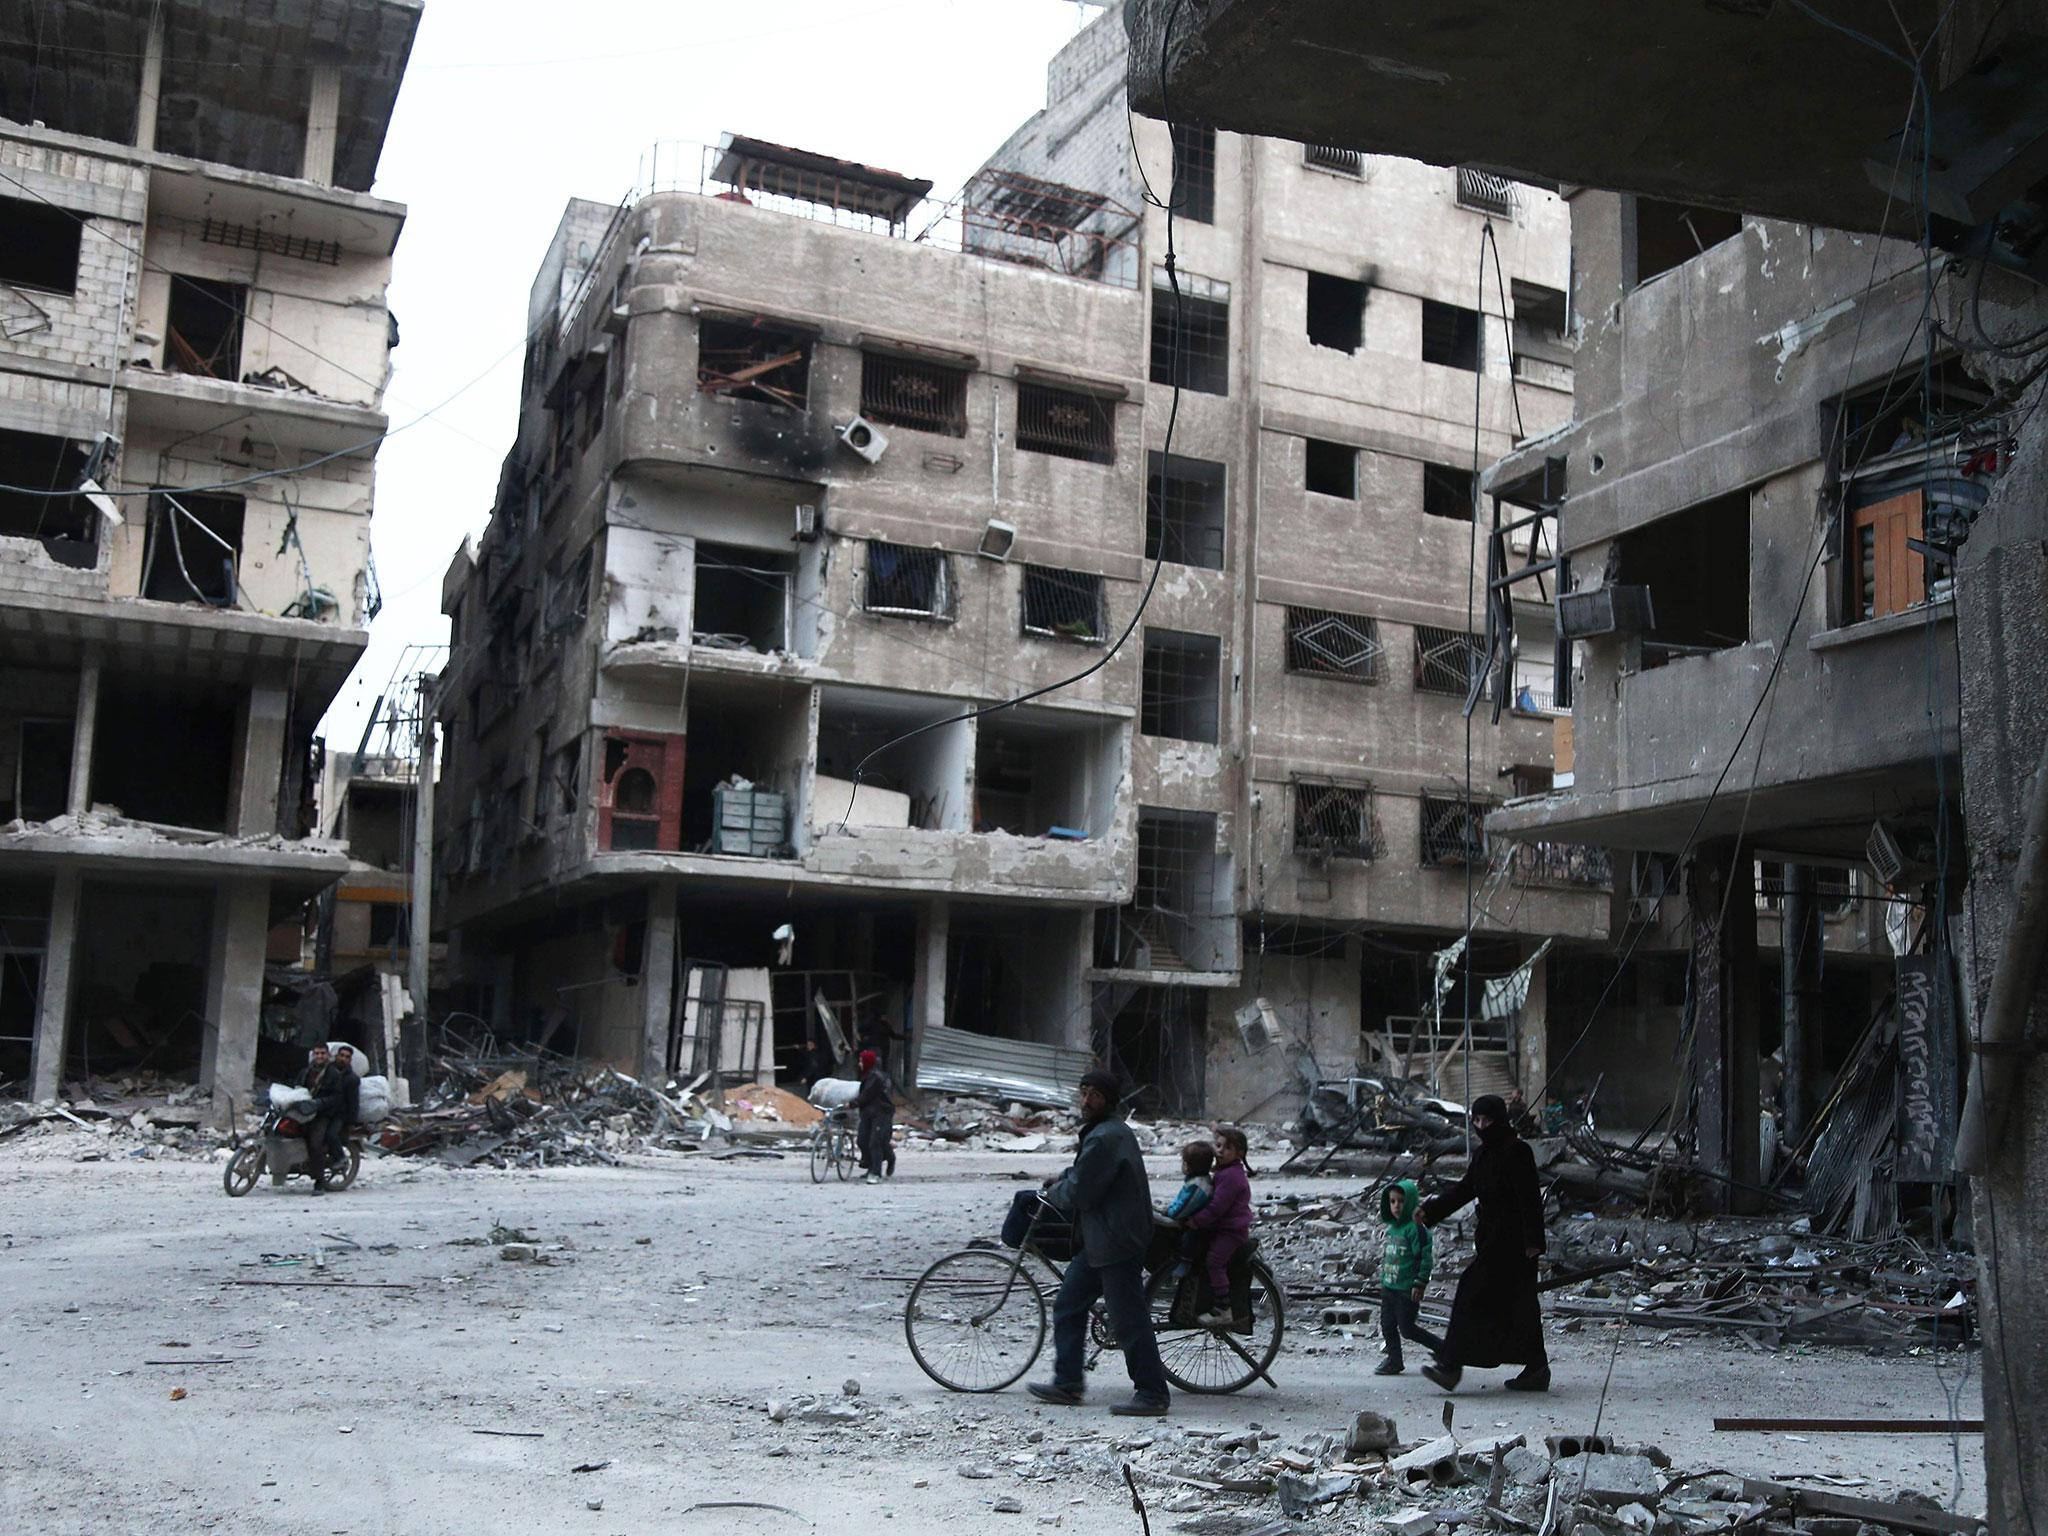 Syrians walk past destroyed buildings in Arbin in the rebel-held enclave of eastern Ghouta on Sunday